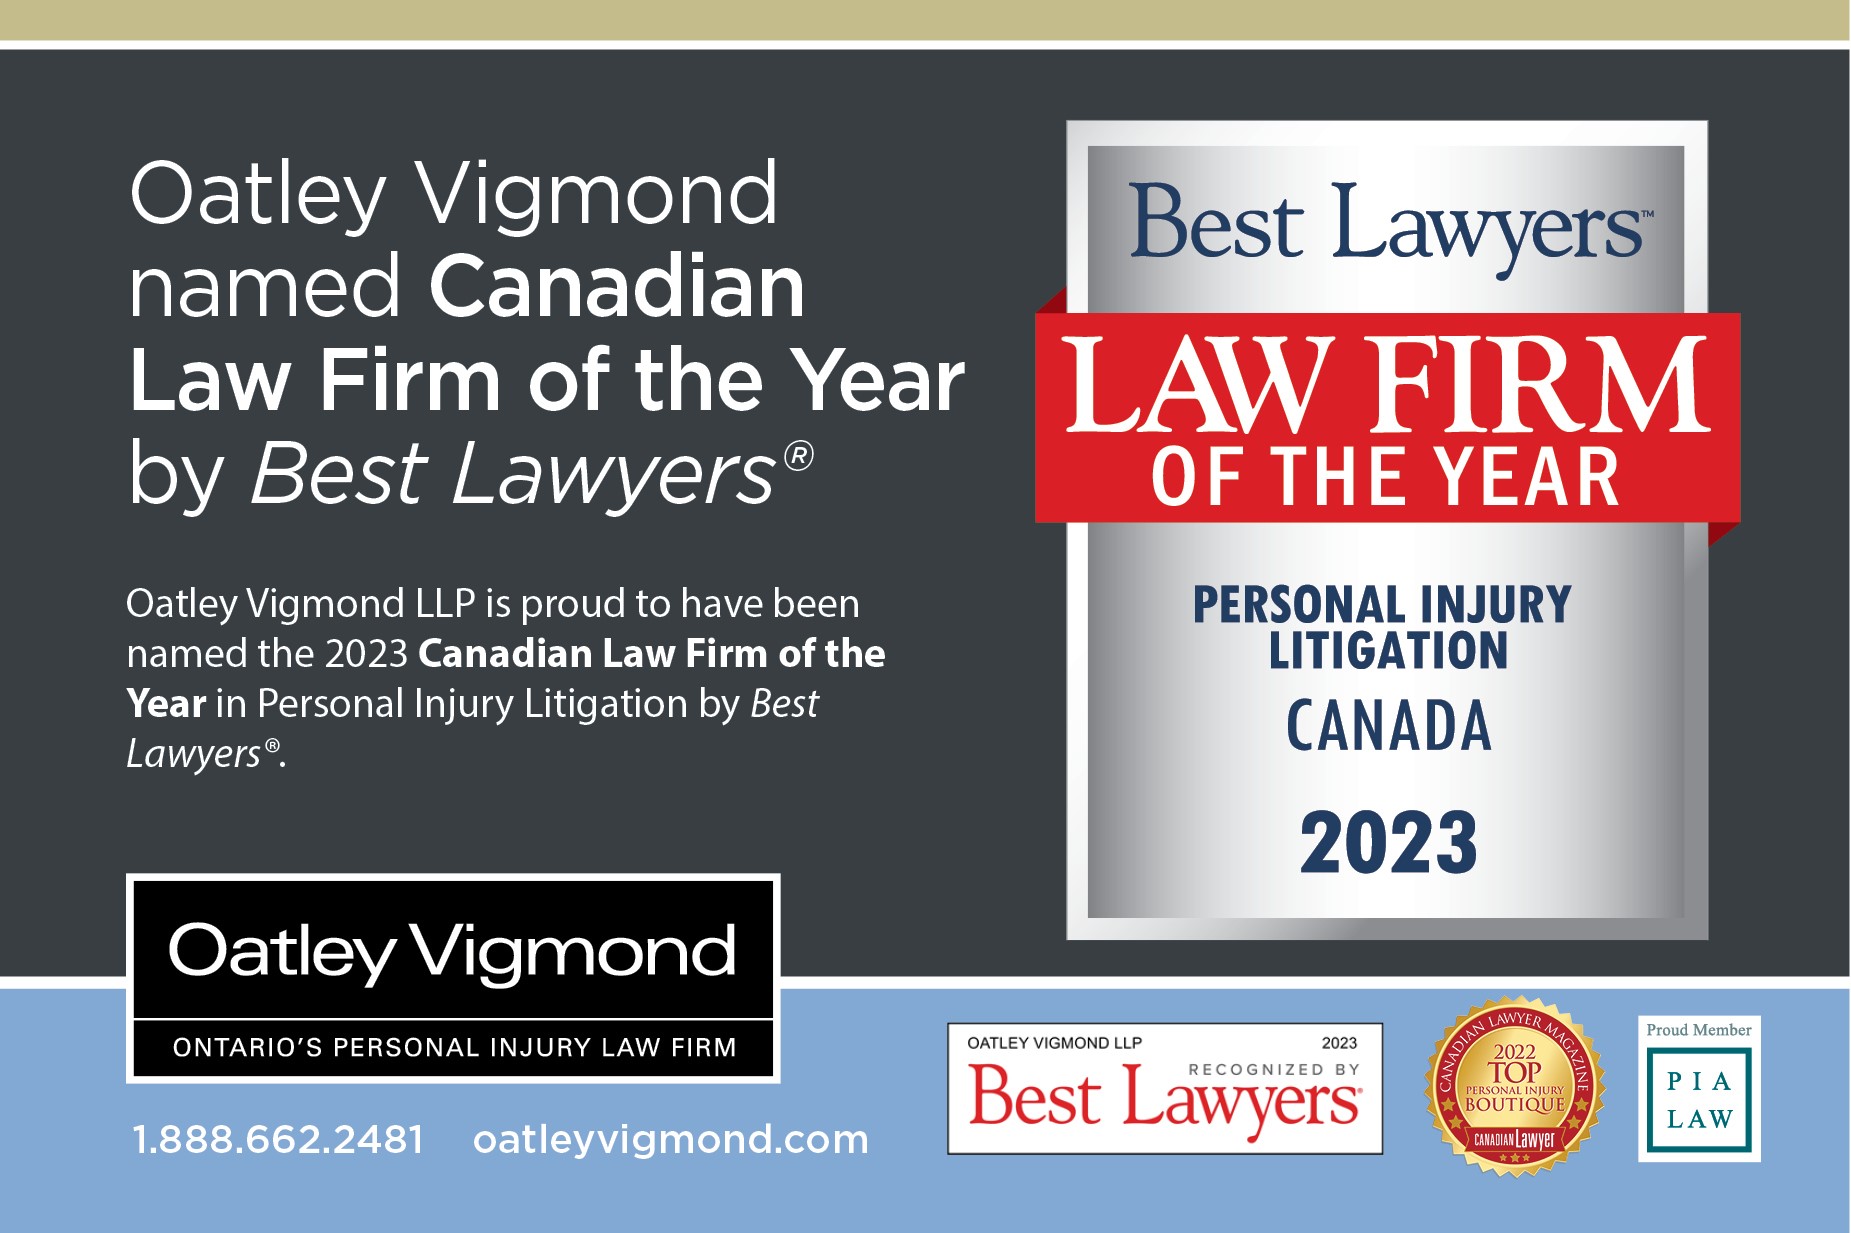 Oatley Vigmond Named ‘Law Firm of the Year’ for Personal Injury Litigation by Best Lawyers in Canada™